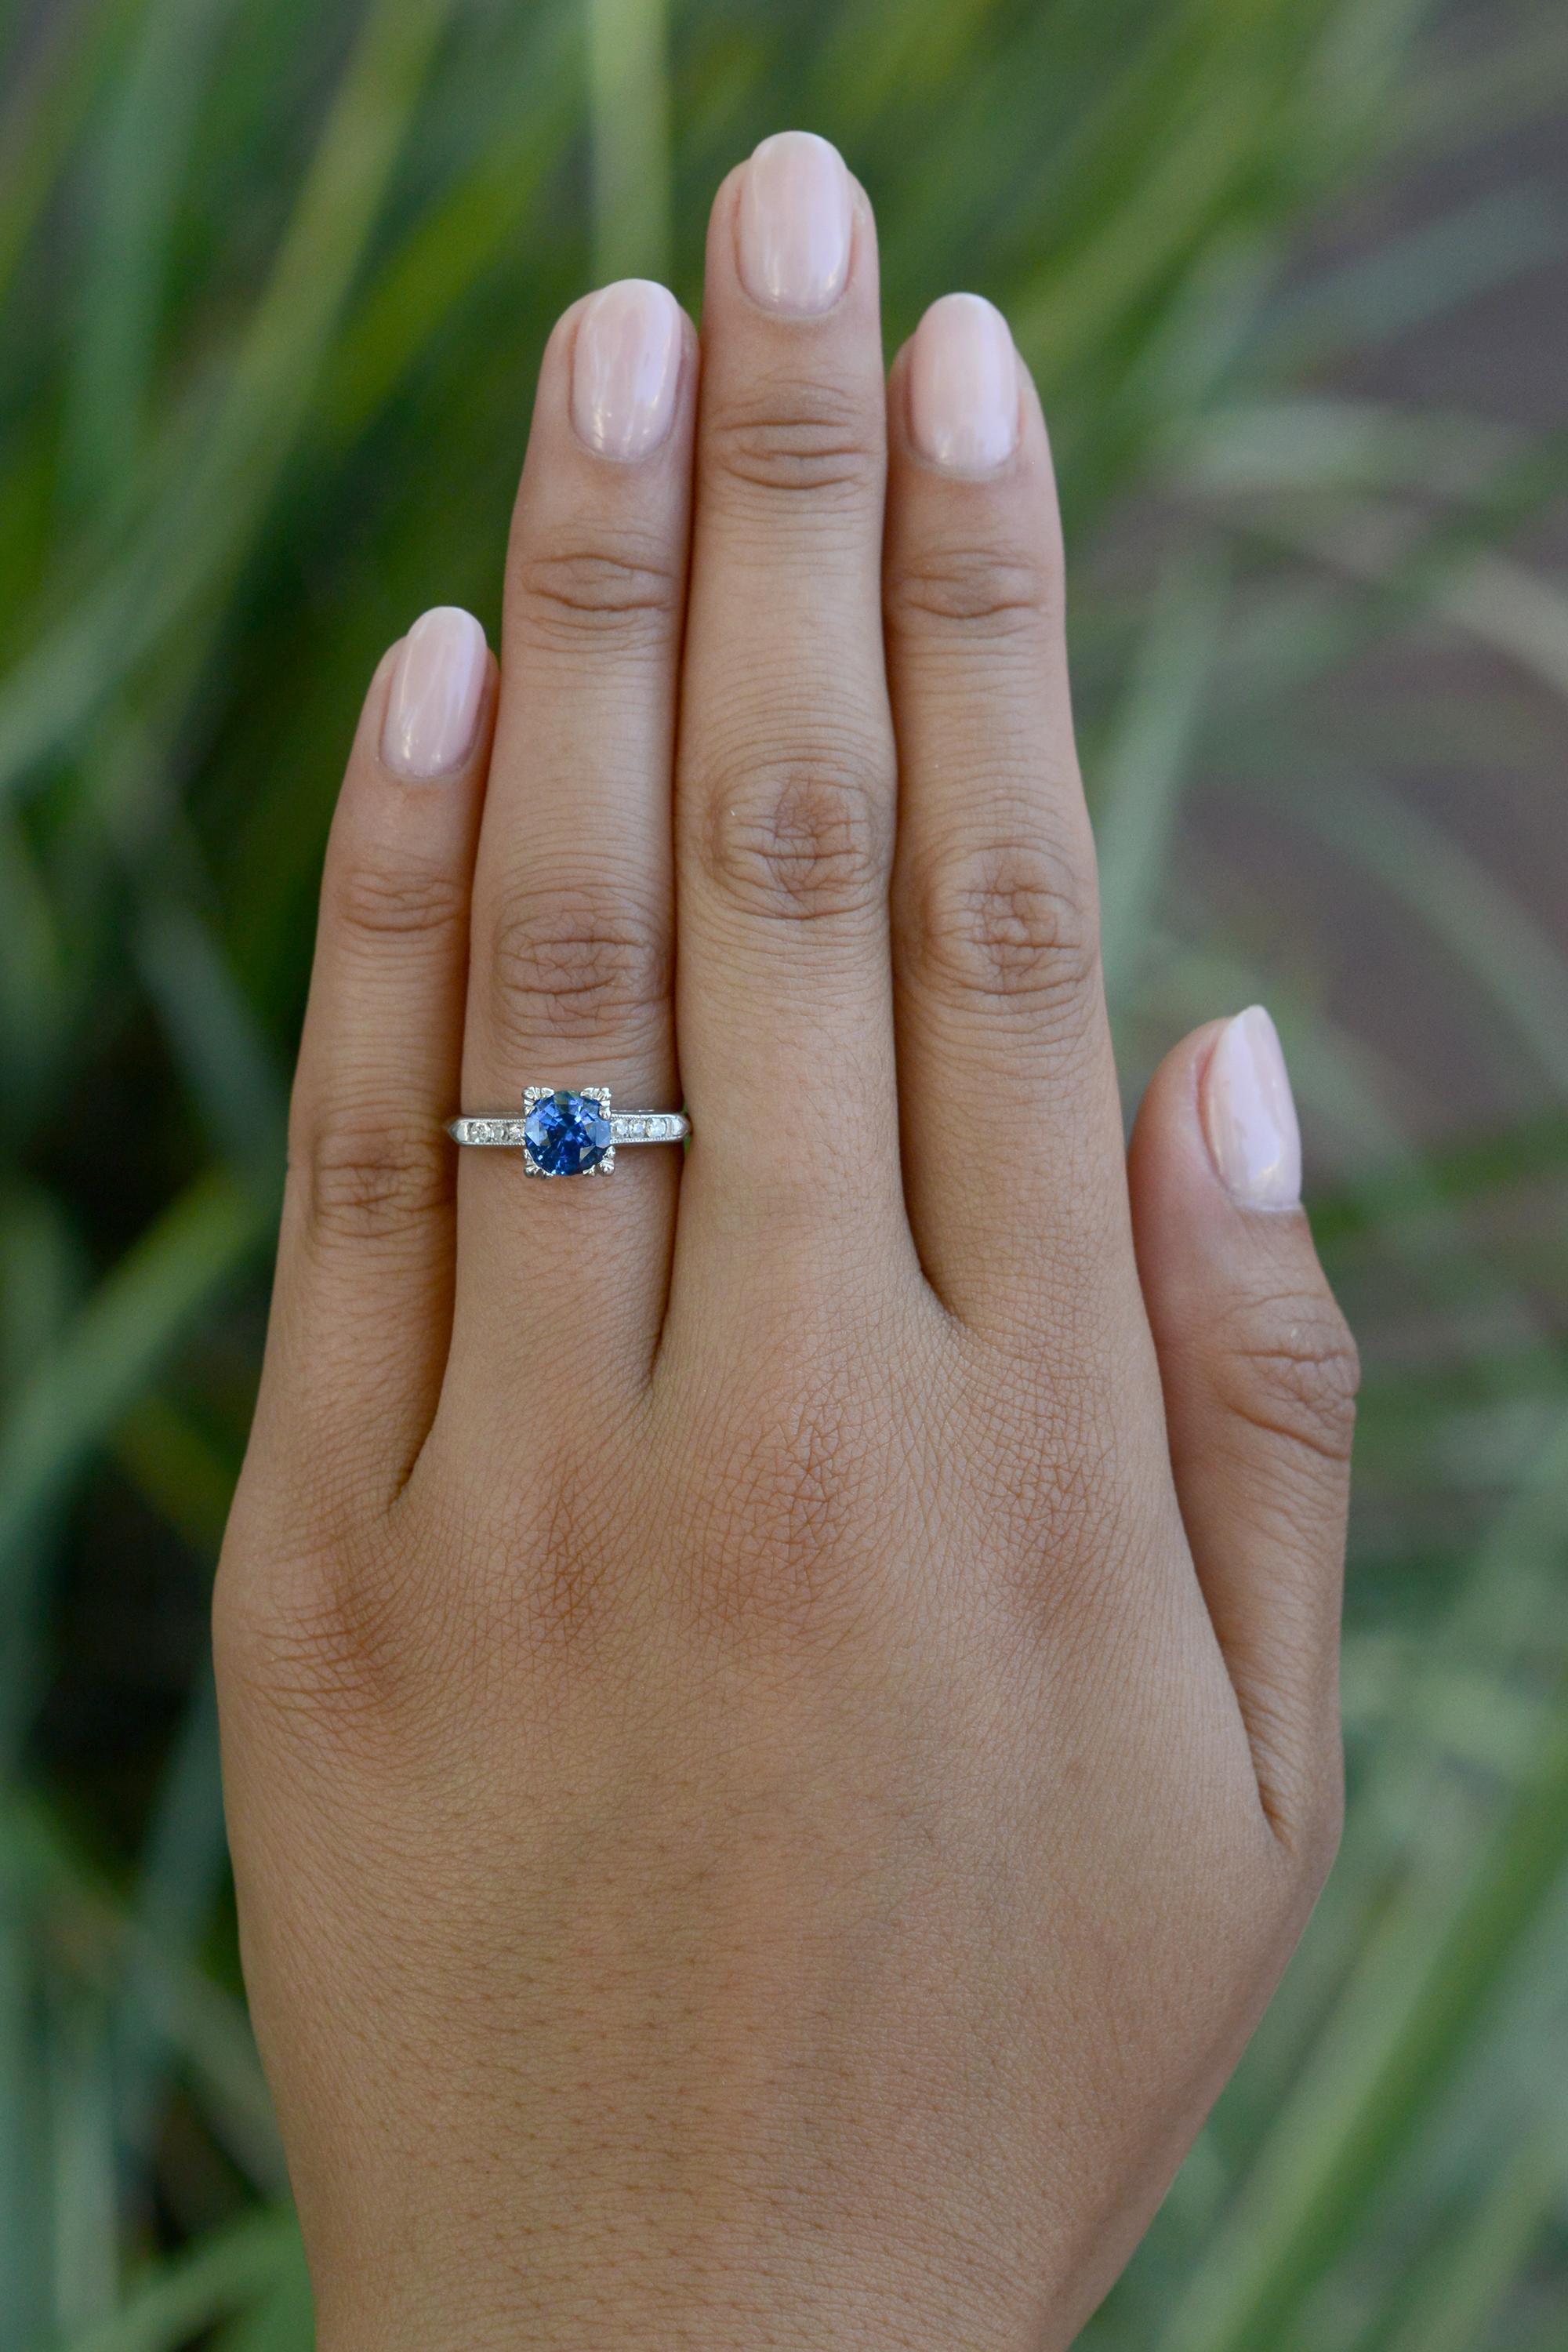 An authentic retro gemstone engagement ring, circa 1940s. This vintage heirloom features a lovely, rich, velvety-blue sapphire solitaire of 1.25 carats perched in enduring platinum. The supreme craftsmanship percolates with a sumptuous knife edge